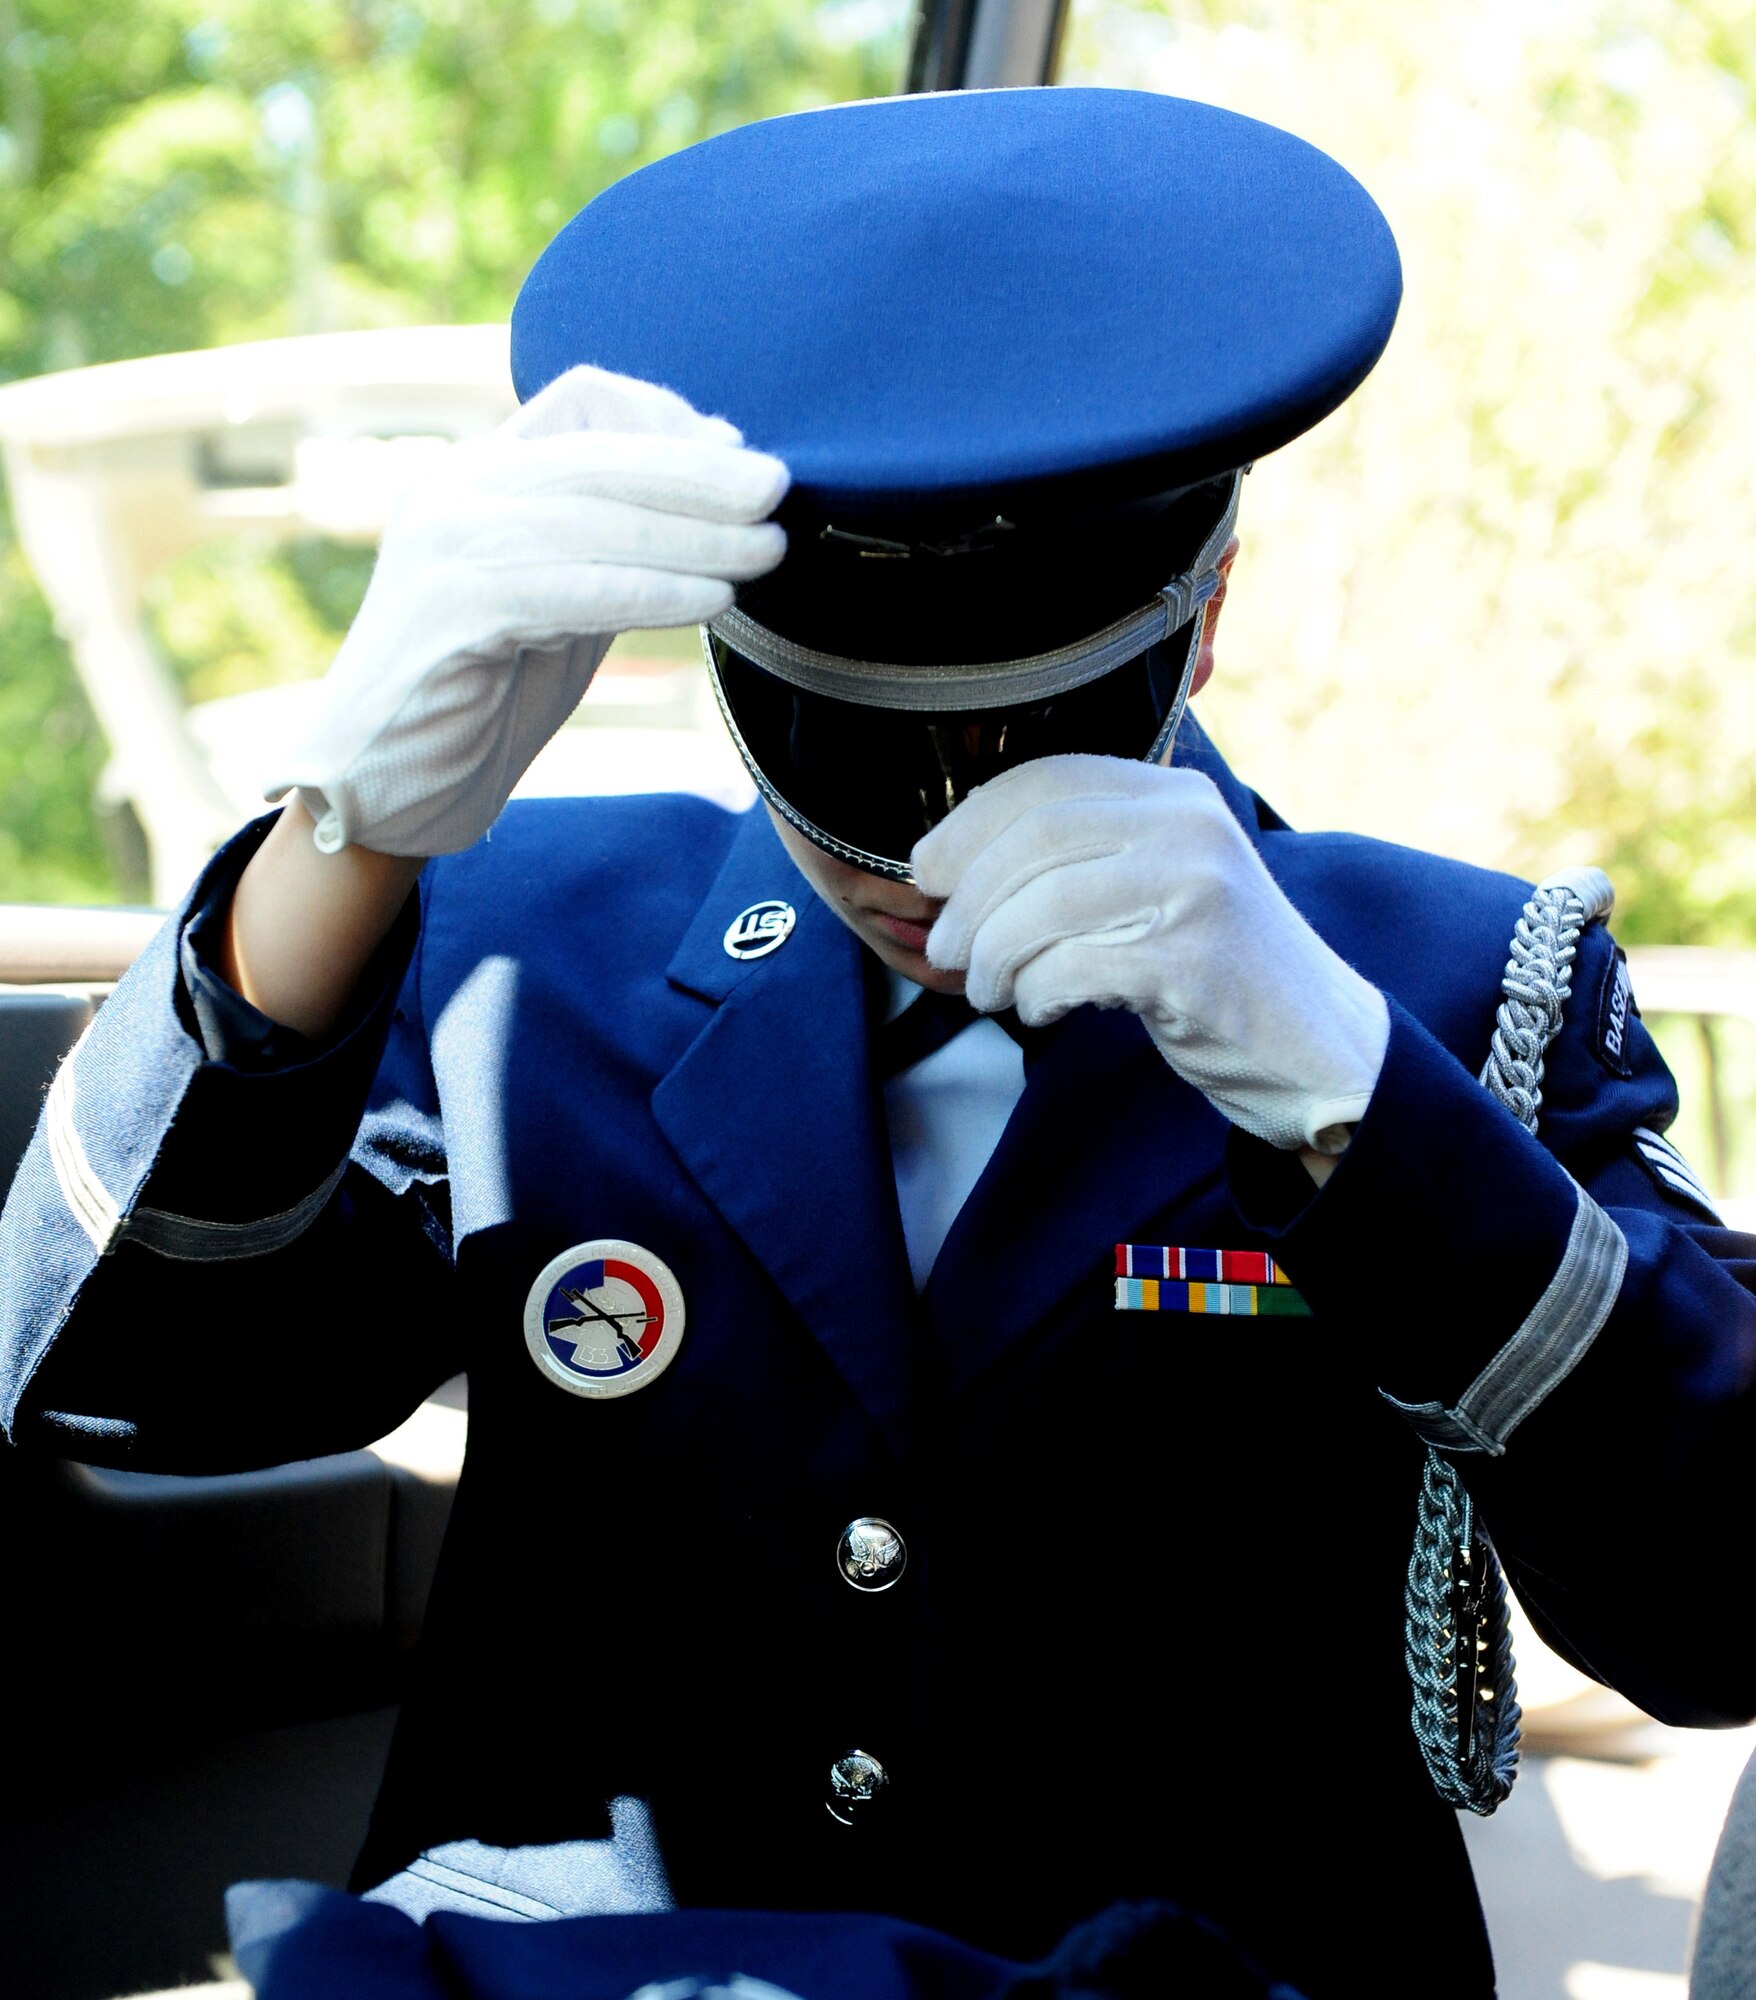 Senior Airman Emily Harris, member of the Maxwell Air Force Base Honor Guard prepares to perform a memorial ceremony held Aug. 22, 2012 at the Alabama National Cemetary in Montevallo Ala. Although Mr. was U.S. Naval veteran, Honor Guard Airmen participate in joint service funerals around the globe. (U.S. Air Force photo by Master Sgt. Michael Voss) 